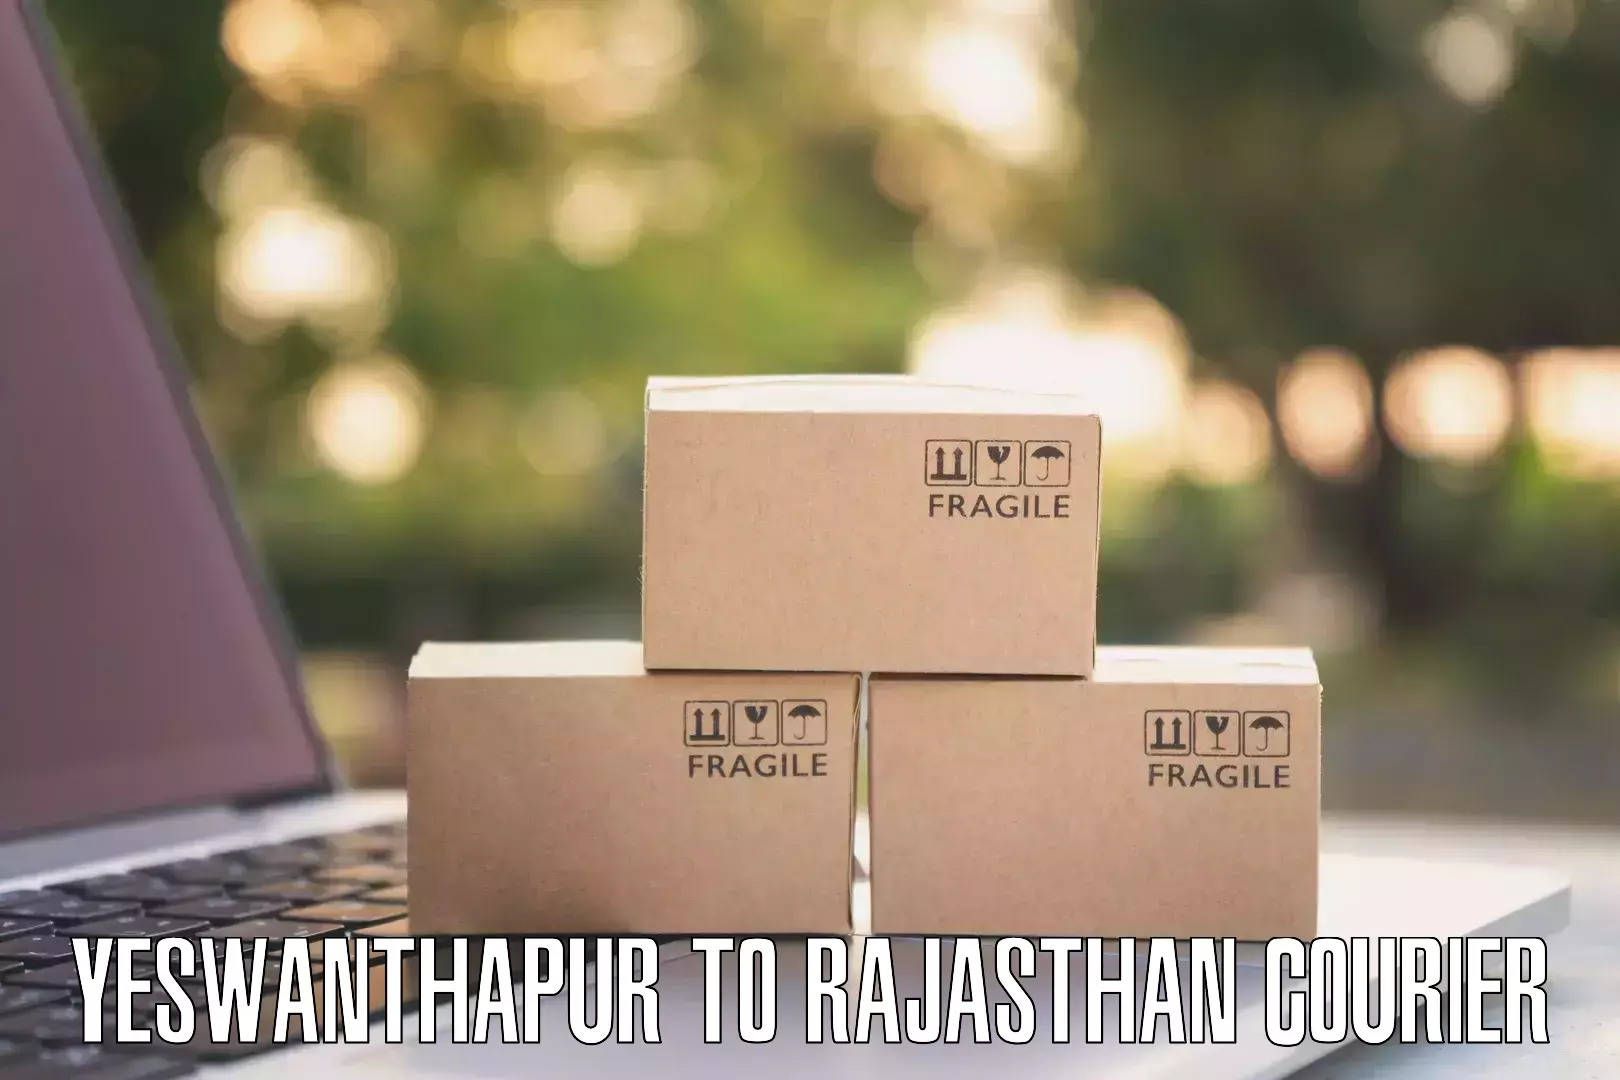 Courier services Yeswanthapur to Rajasthan